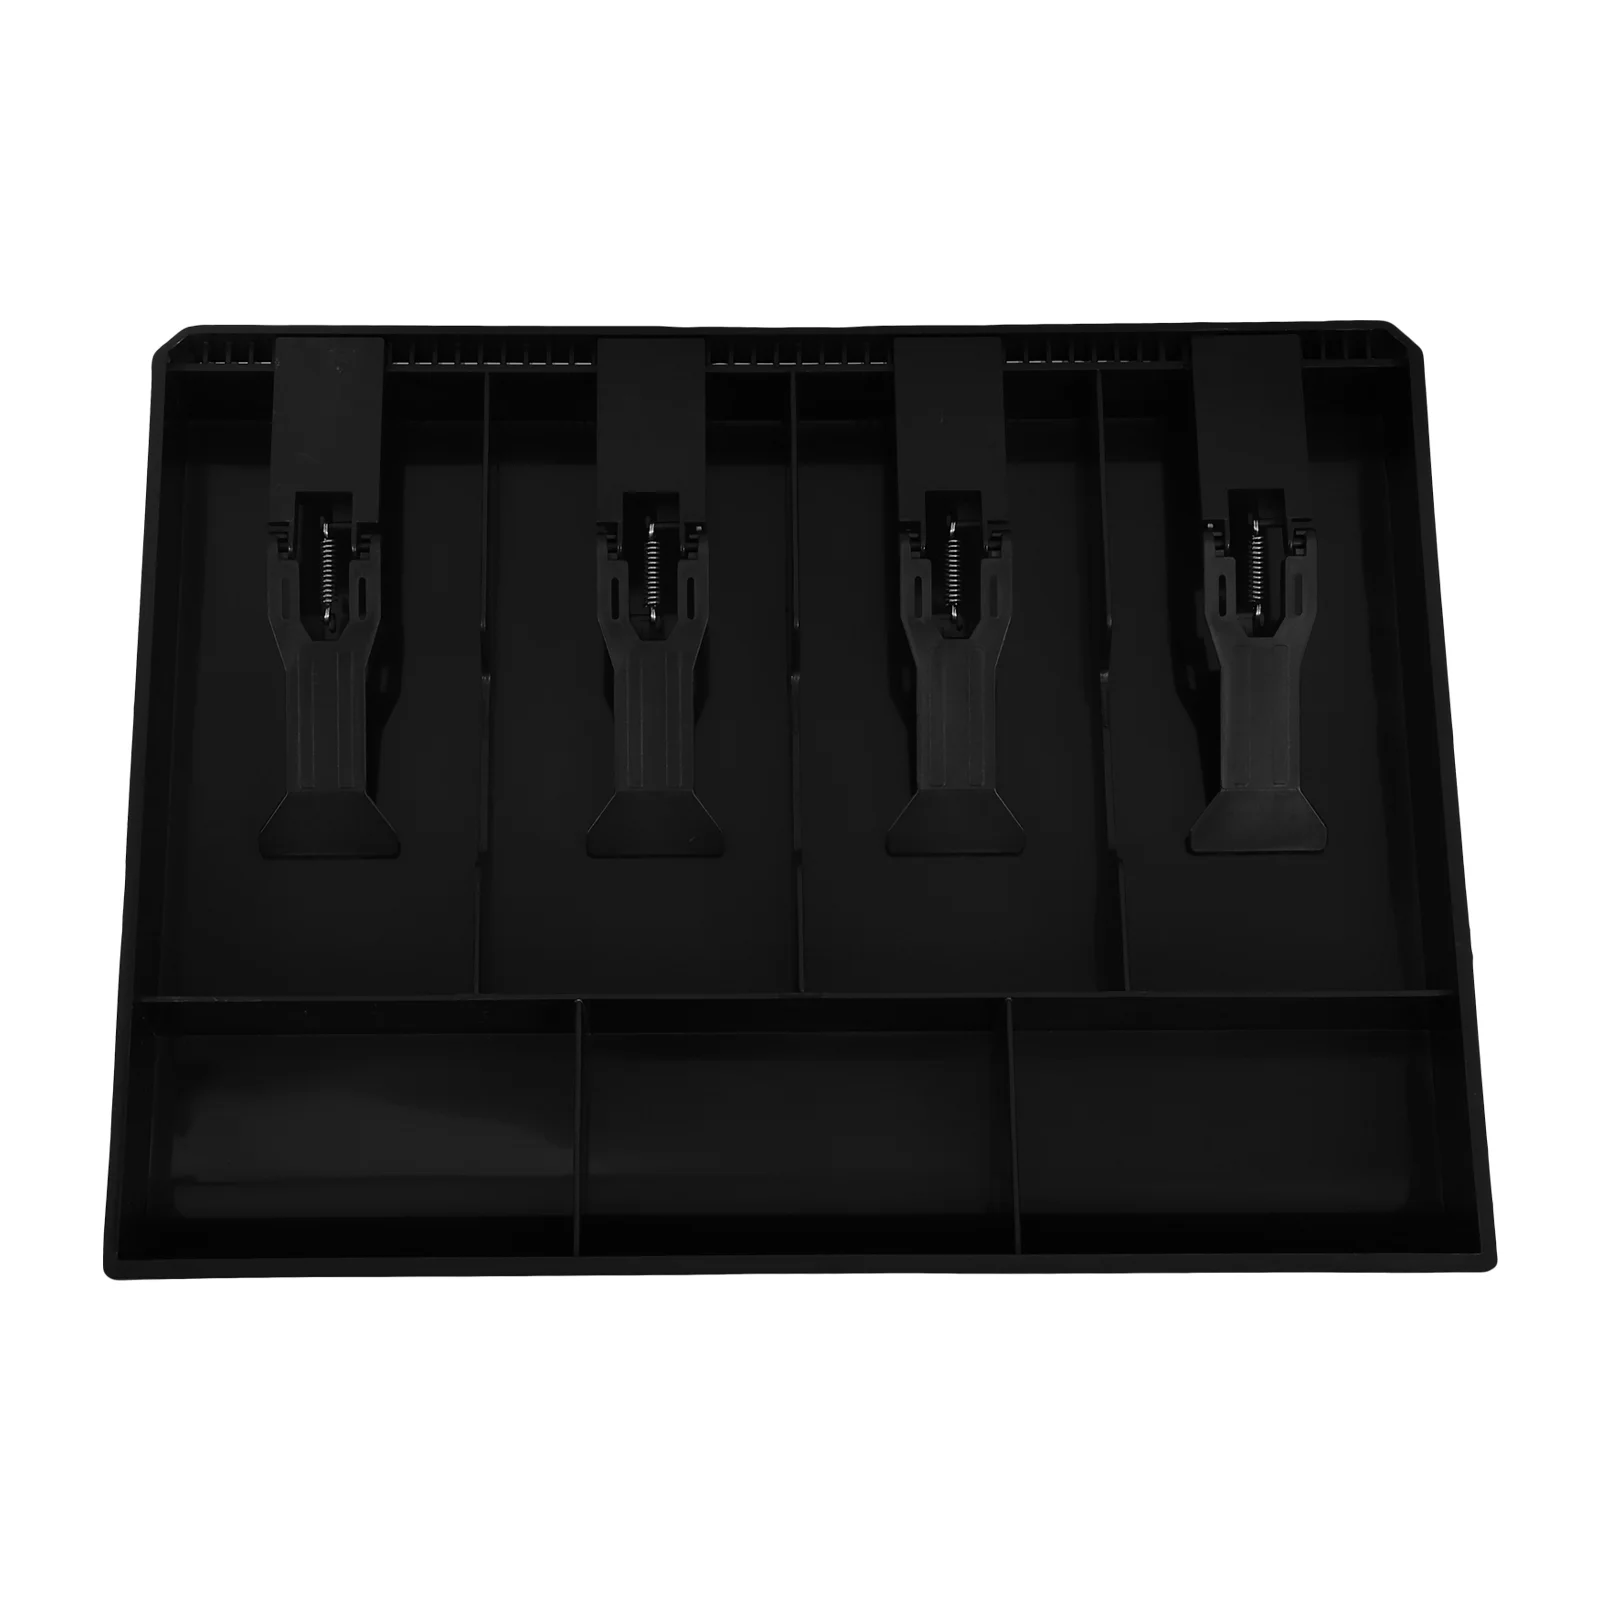 

4 Bills and 3 Coins Cashier Drawer Cash Collection Box Insert Tray for Market Bank Home (Black)